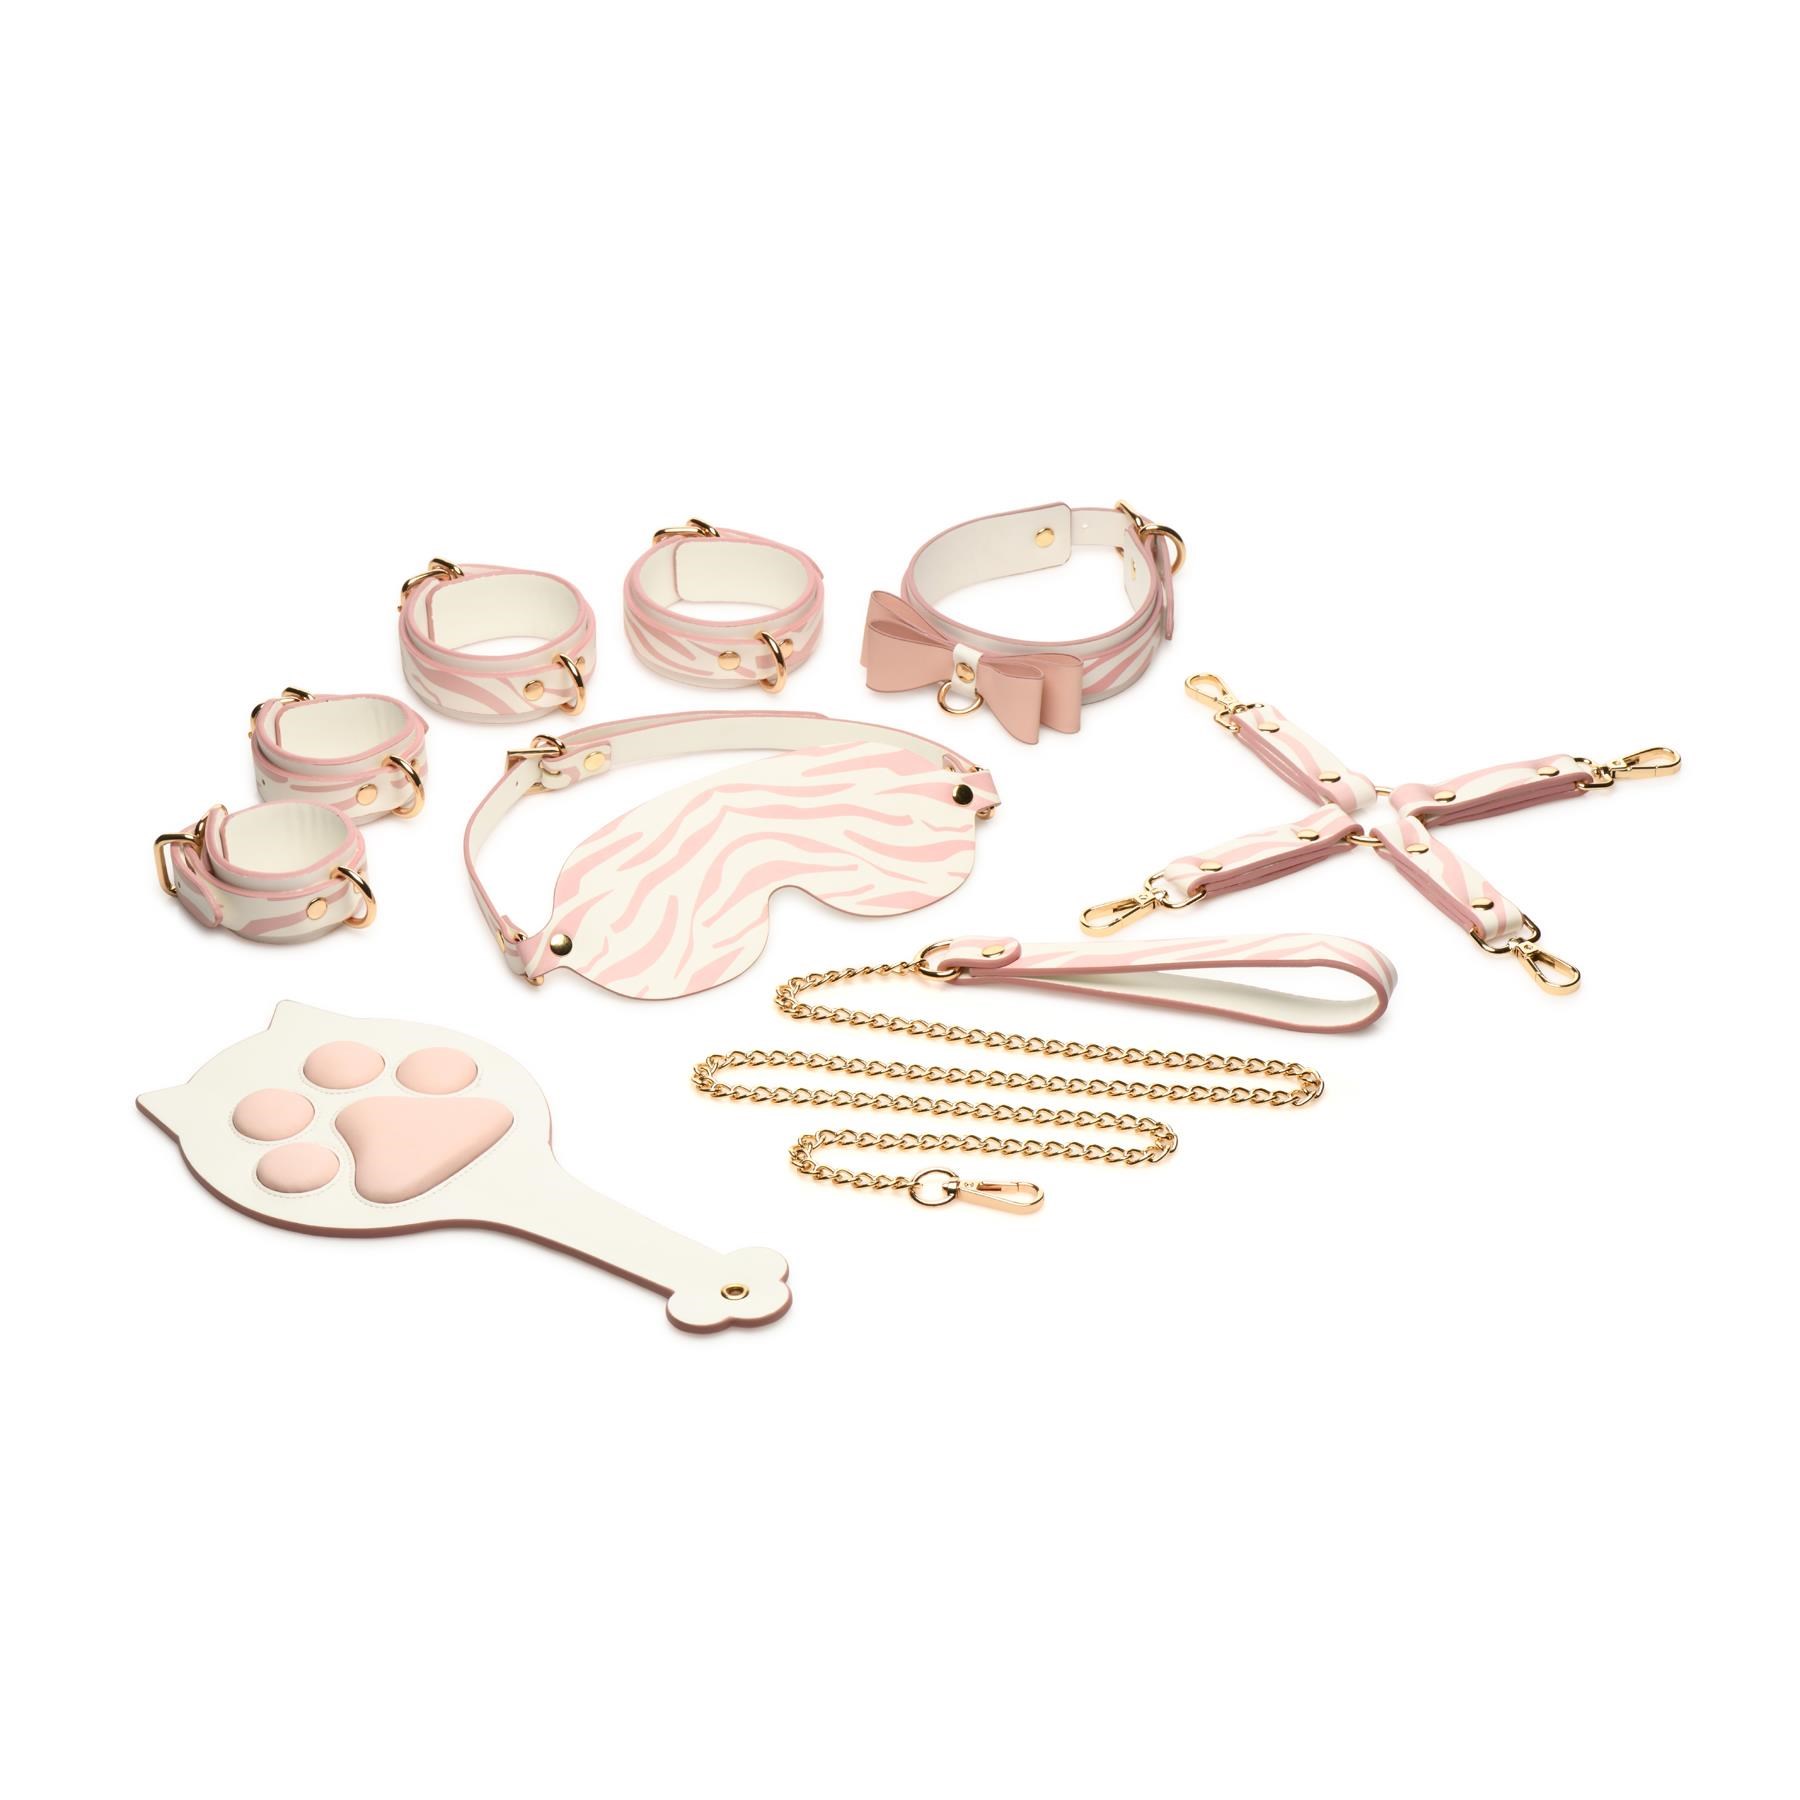 Master Series Pink Kitty Bondage Set - All Components